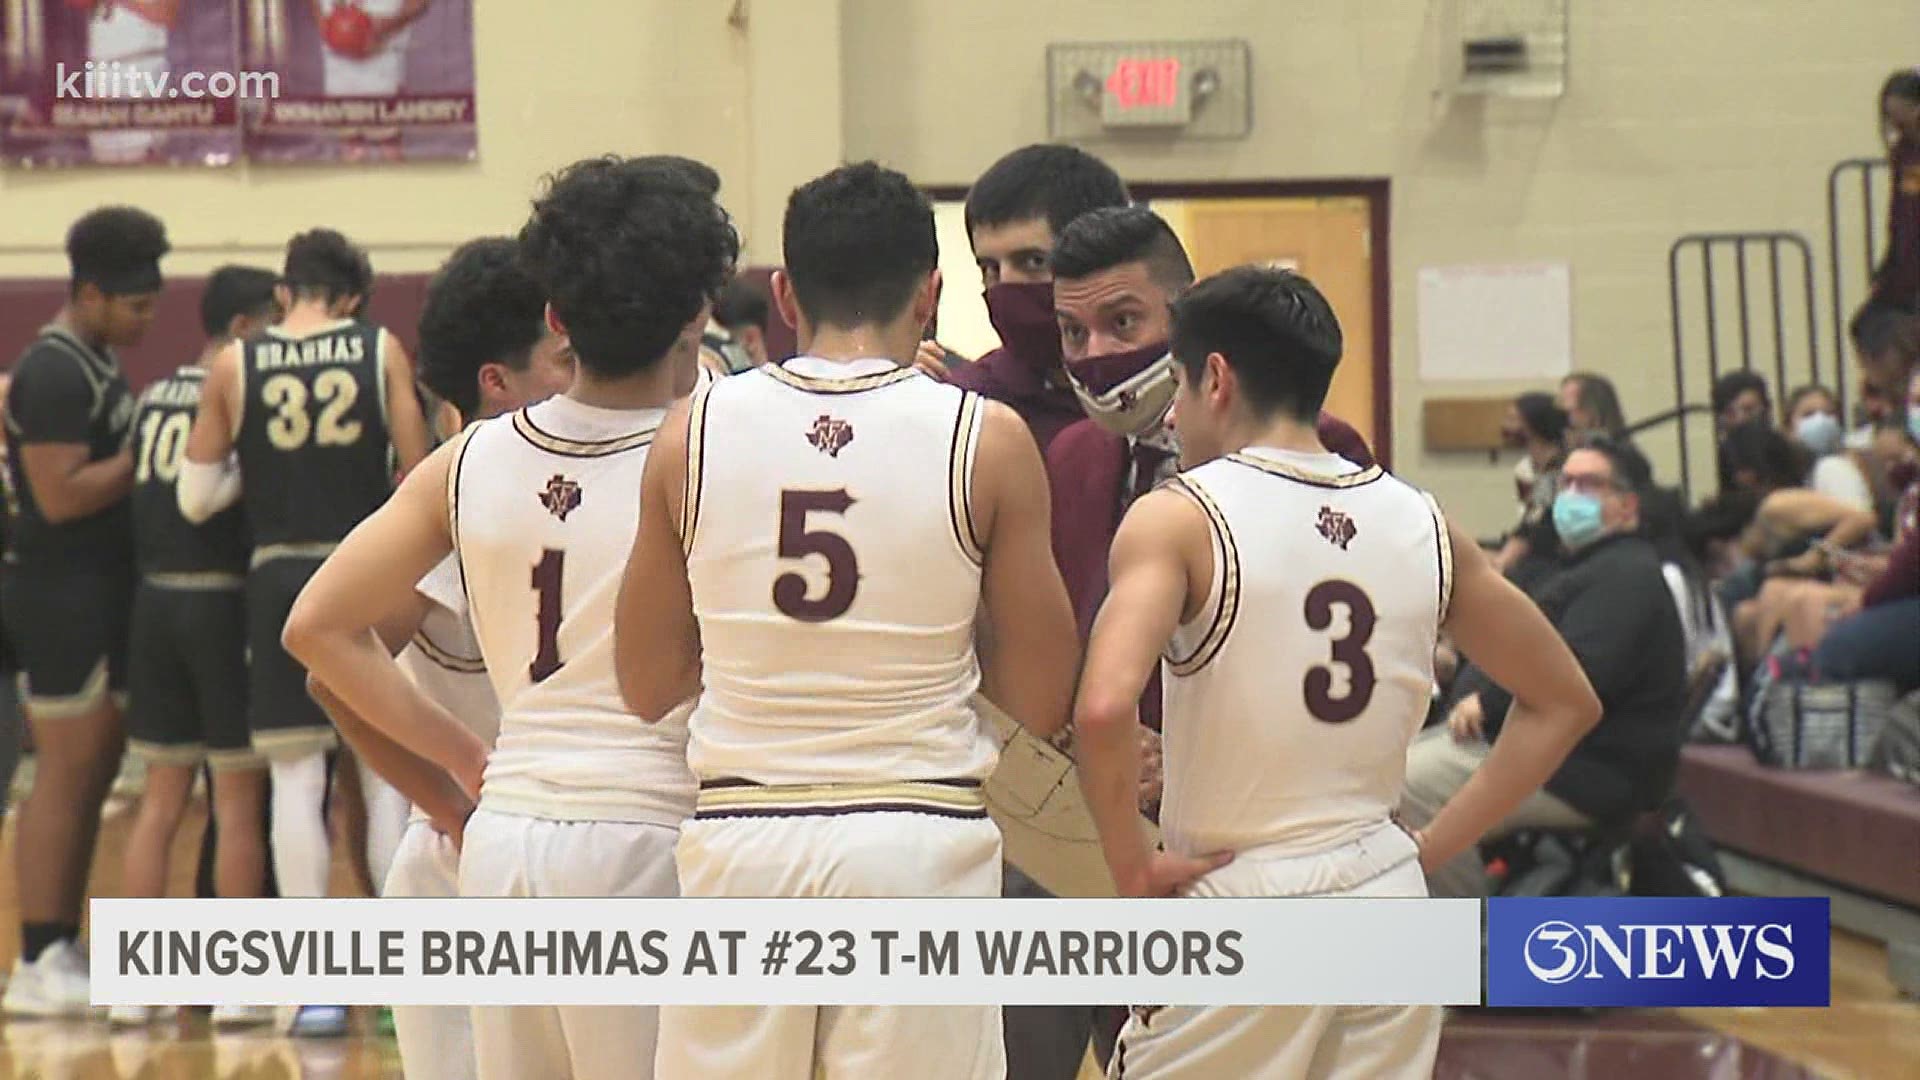 The Warriors got out to a hot start and held off the Brahmas 71-65 to take over sole possession of first place in 31-4A.